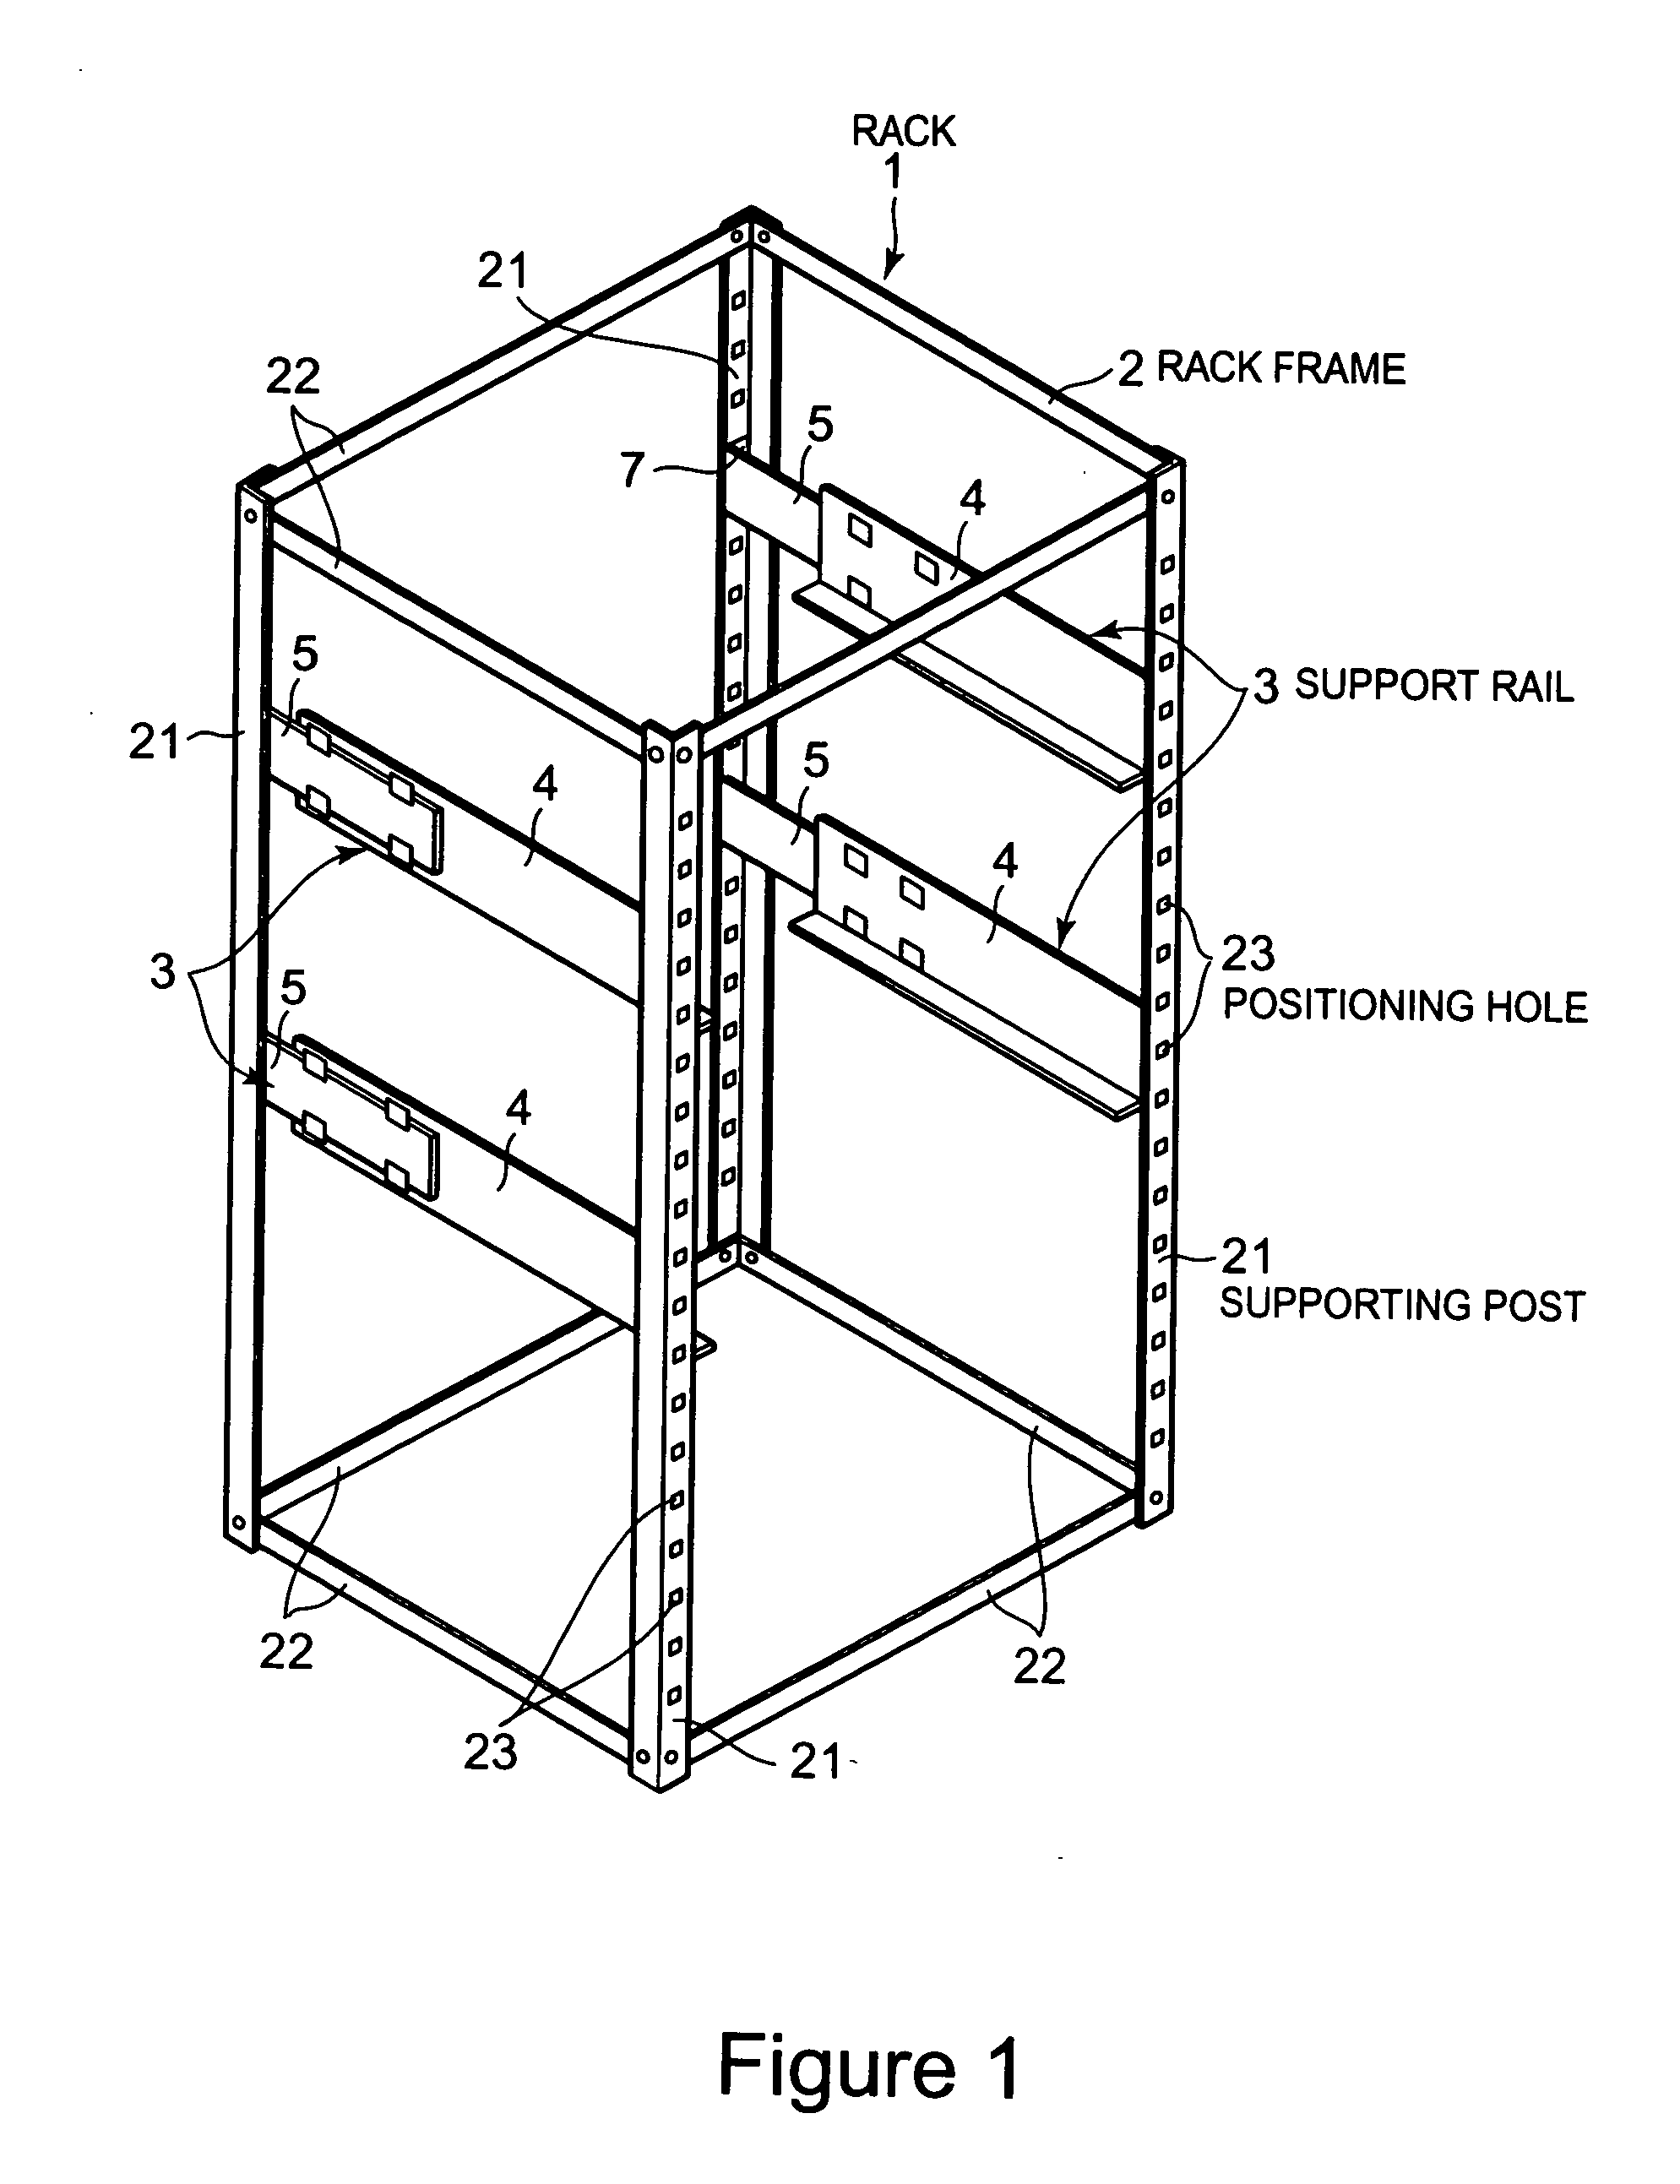 Rack system, adapter, rack frame, support rail, and method of making a rack system